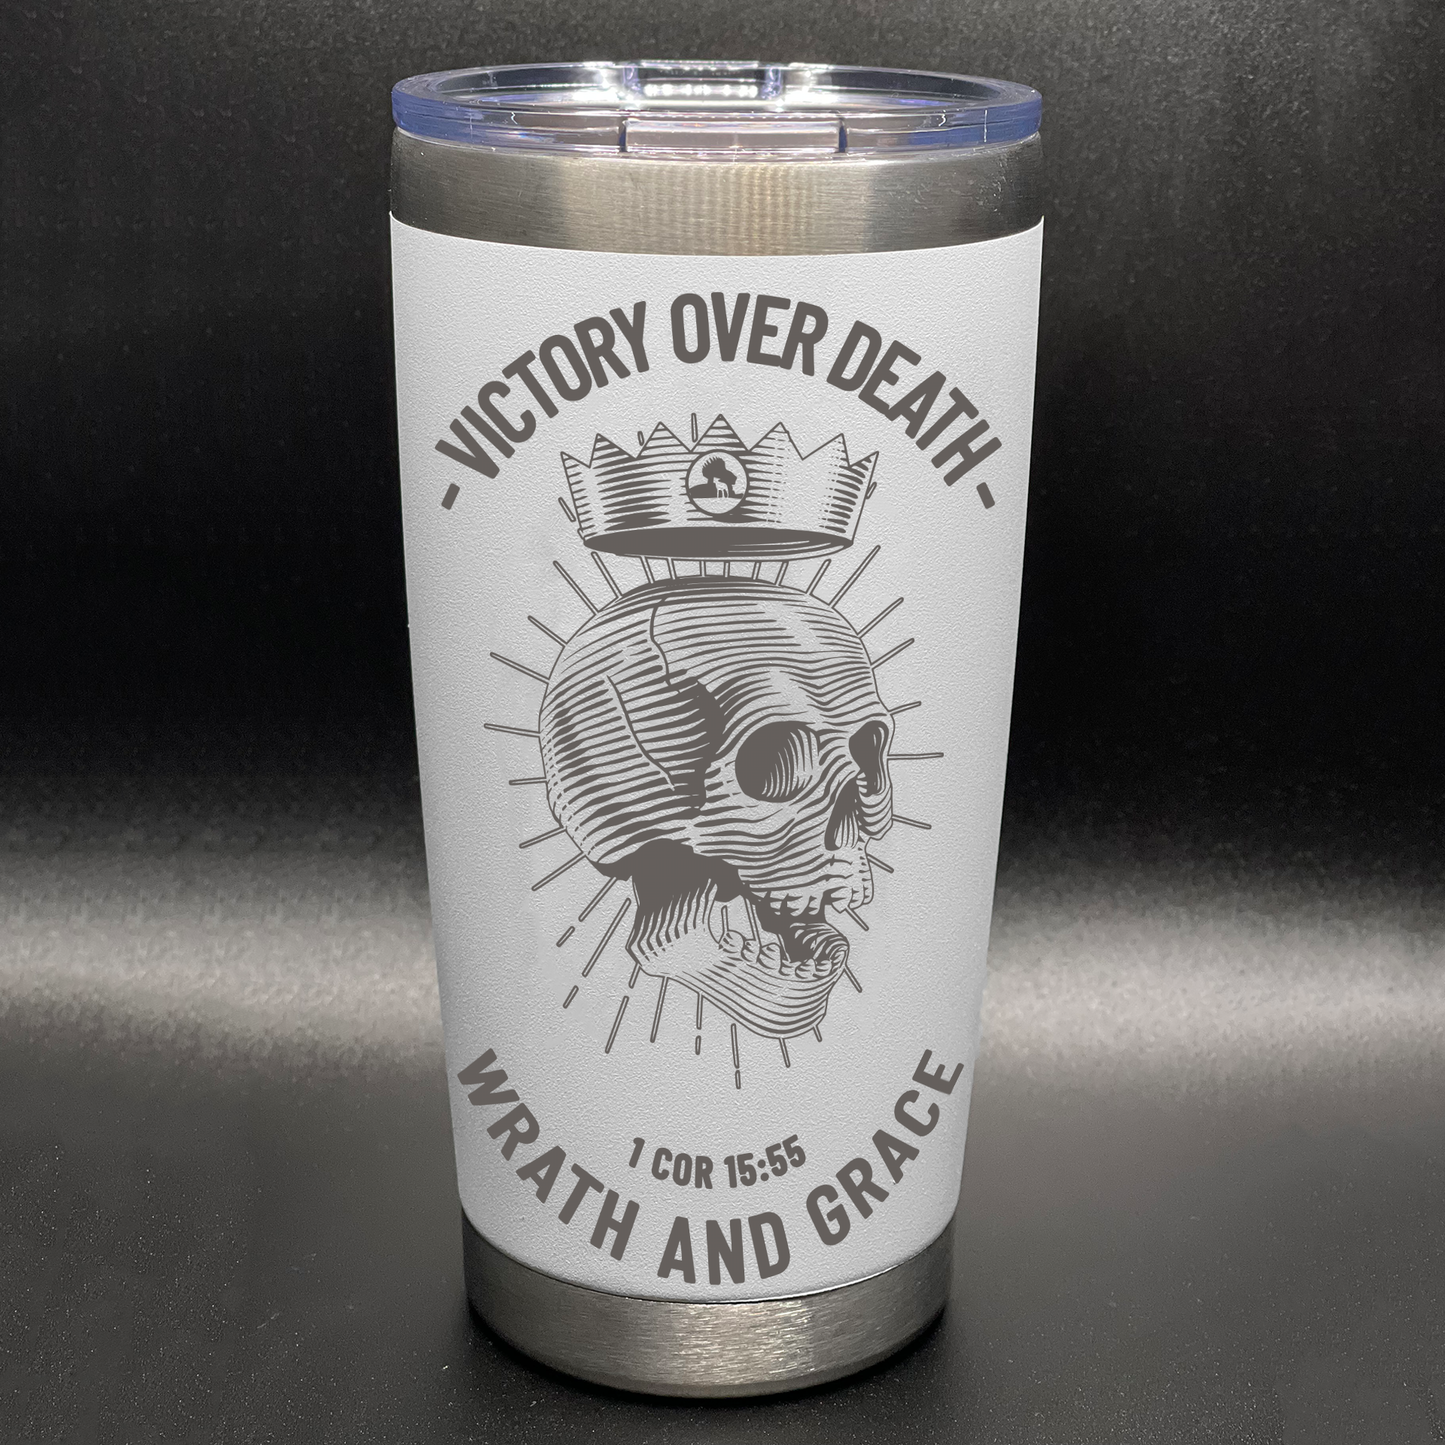 Victory Over Death Tumbler